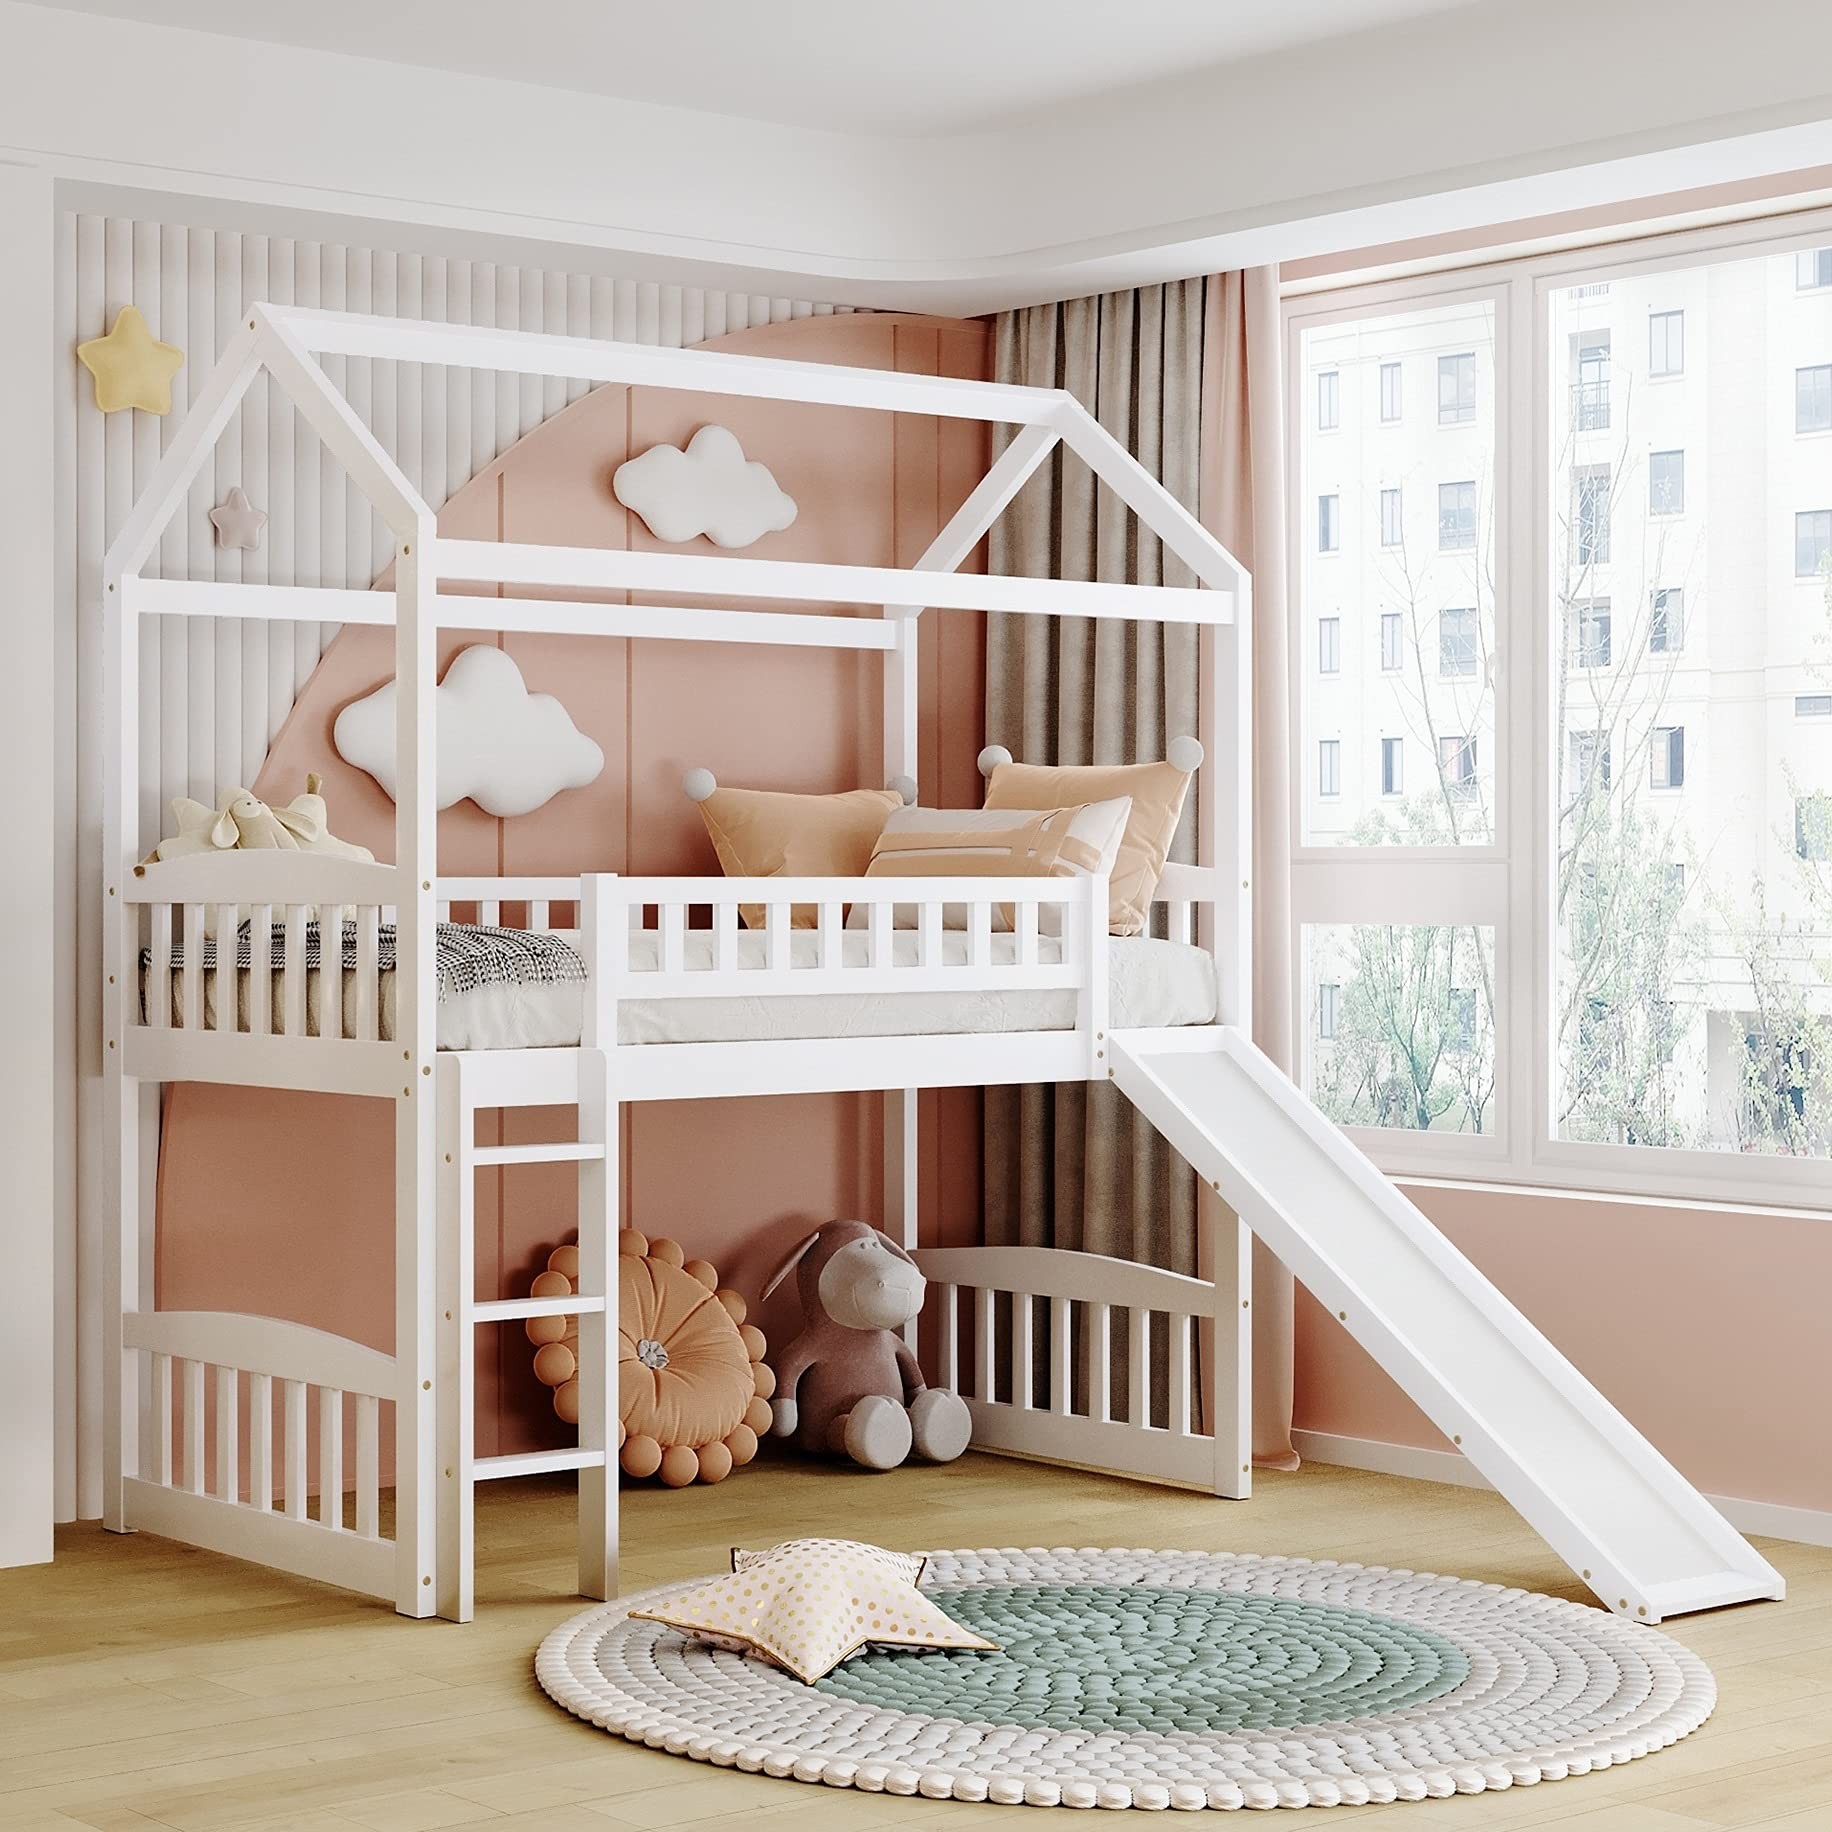 House Loft white Bunk Bed for kids room with Slide